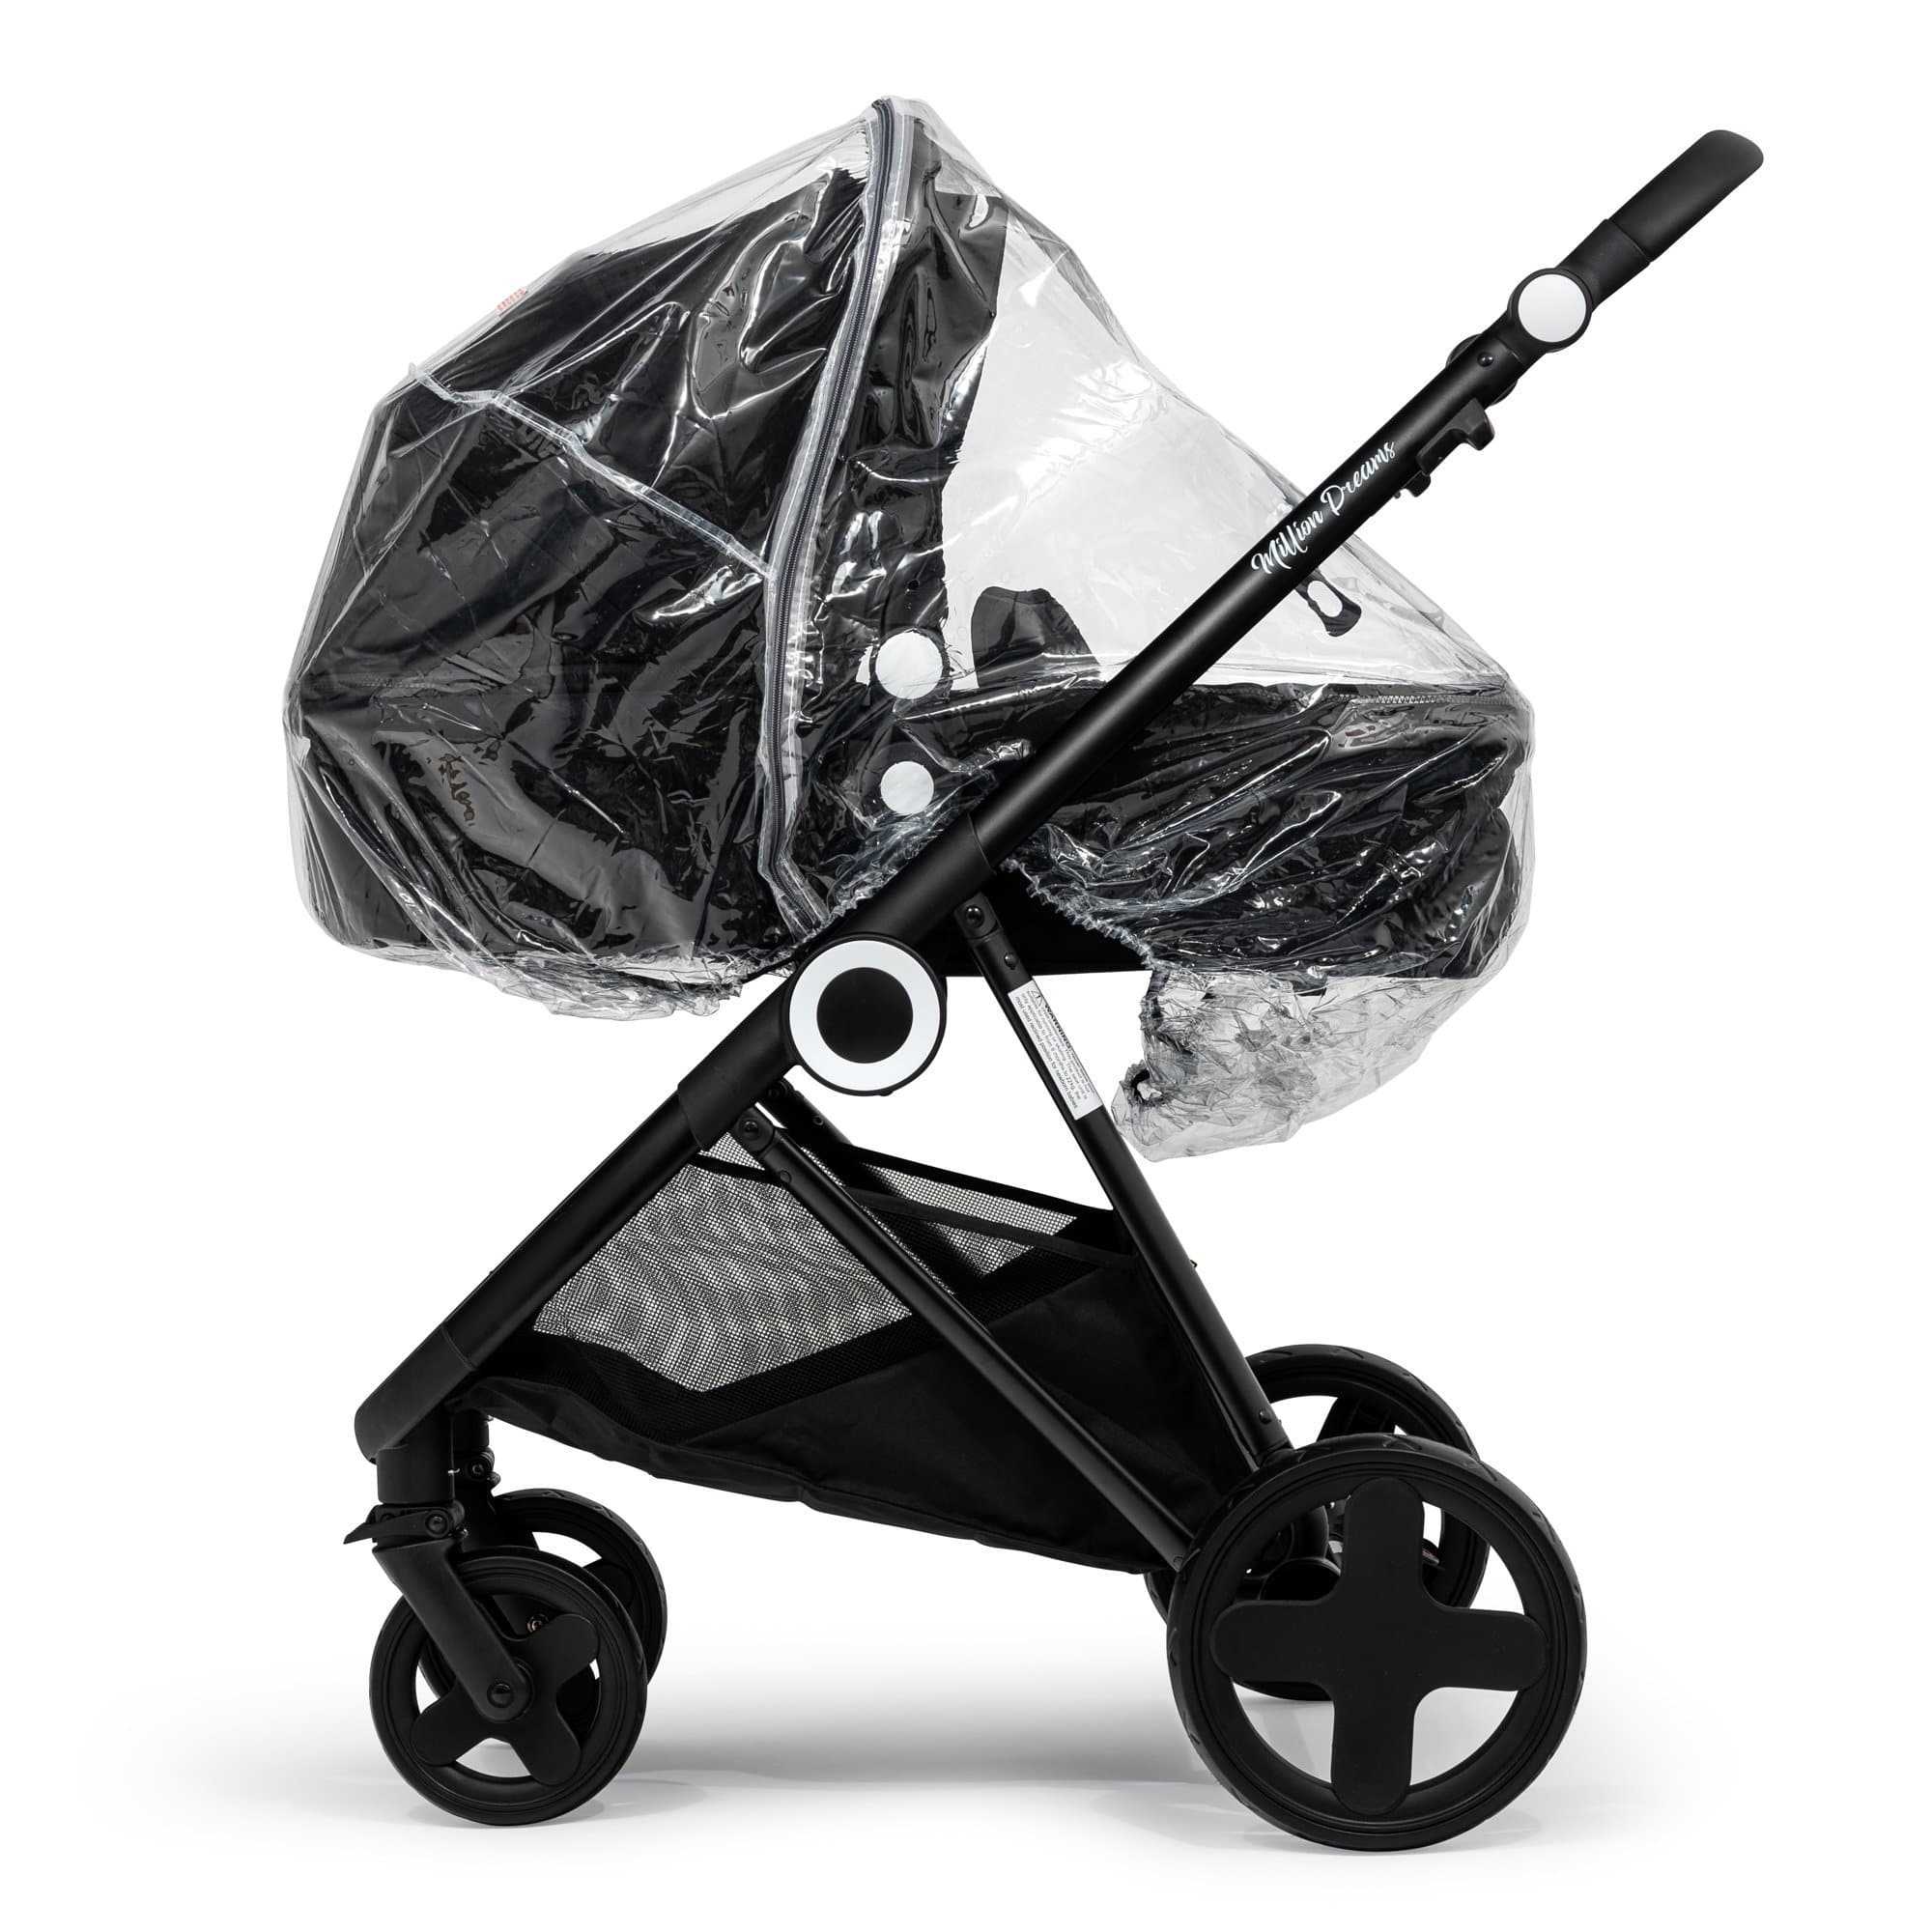 2 in 1 Rain Cover Compatible with Formula - Fits All Models - For Your Little One